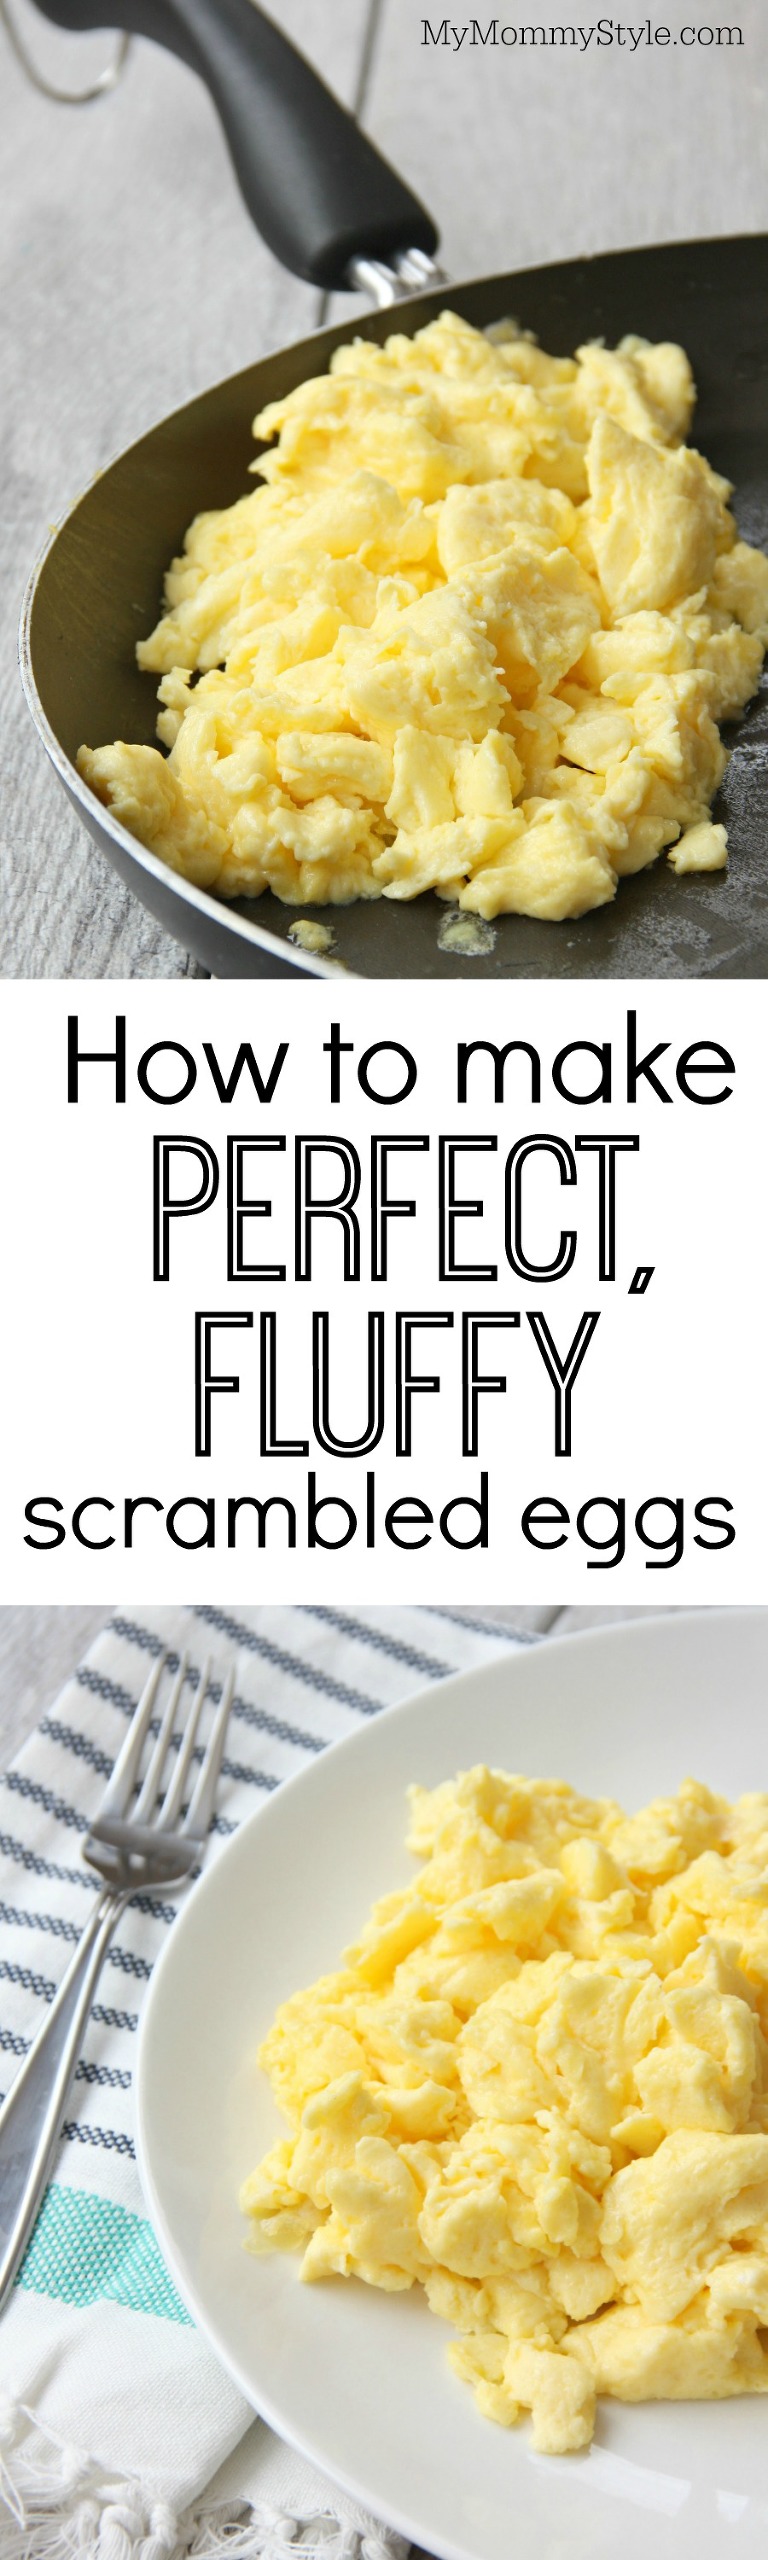 How to make perfect, fluffy scrambled eggs